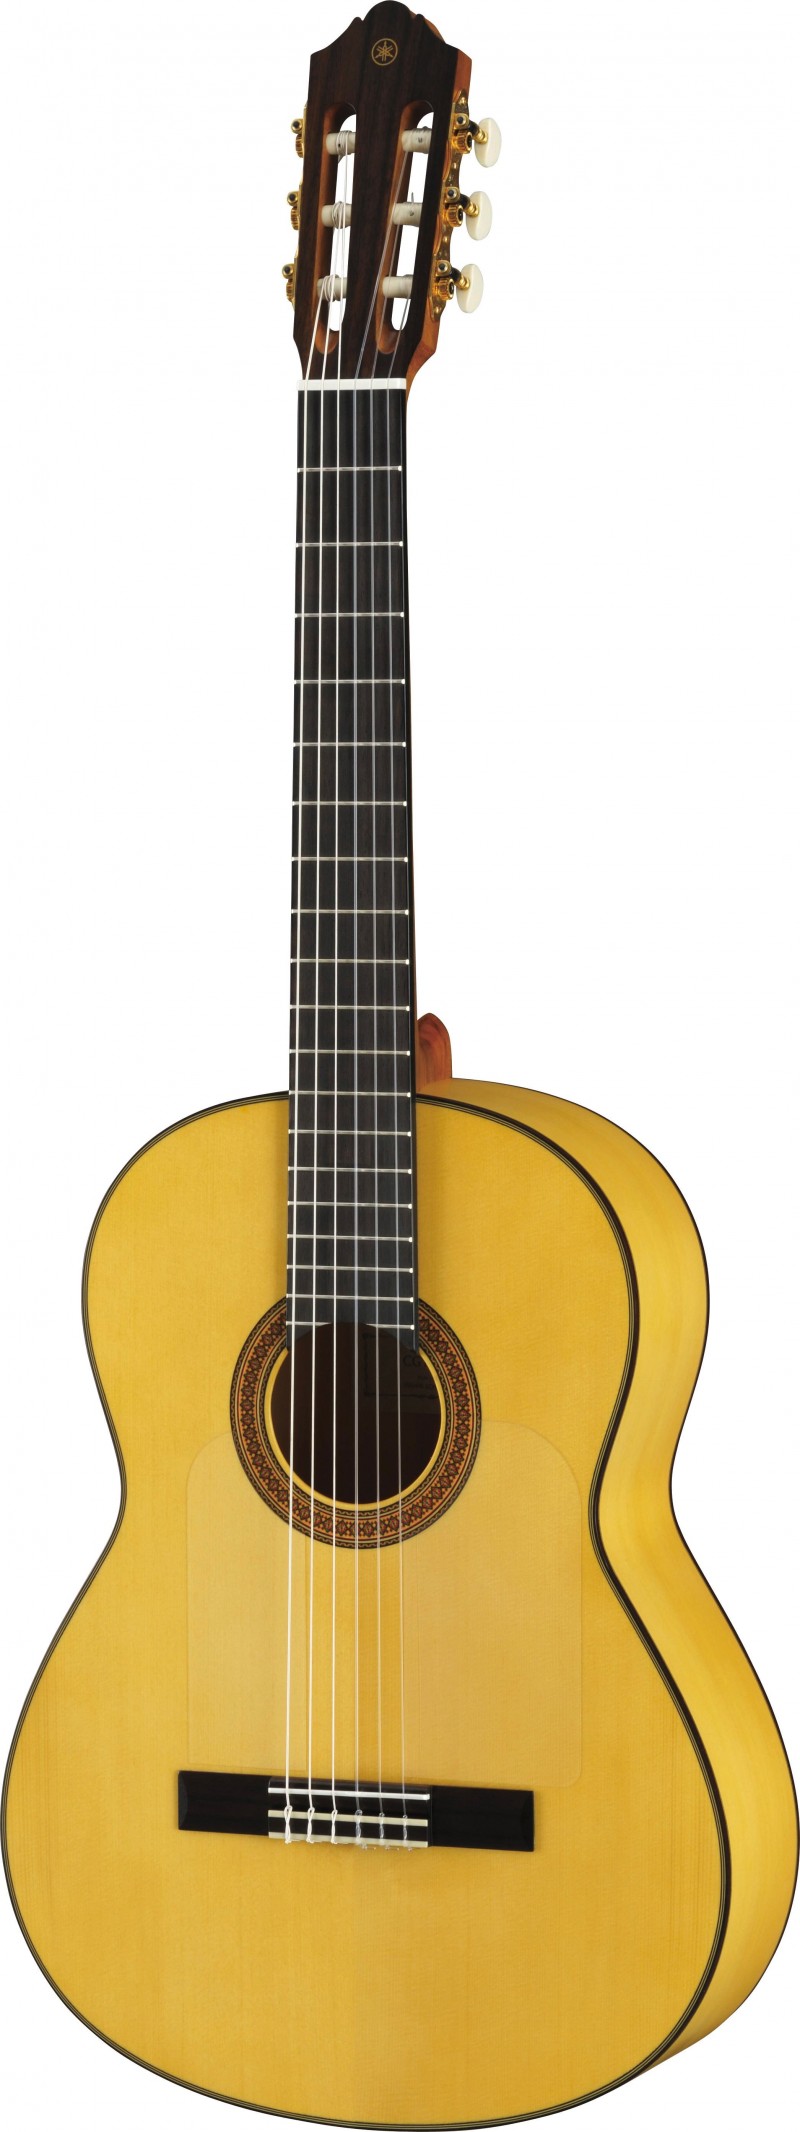 YAMAHA – CG182 – SPRUCE TOP/CYPRESS BACK AND SIDES CLASSICAL GUITAR